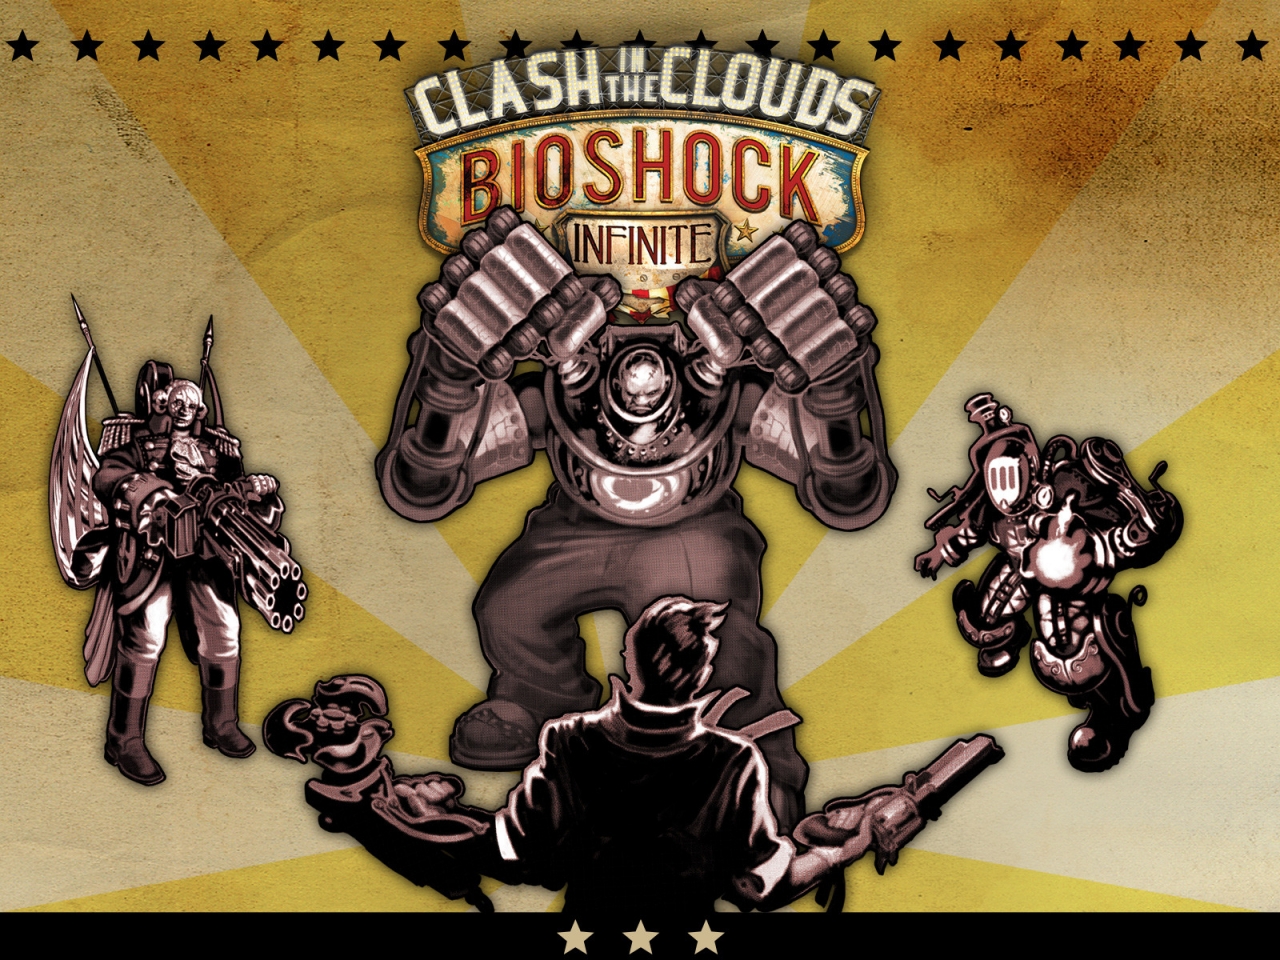 BioShock Infinite Clash in the Clouds for 1280 x 960 resolution